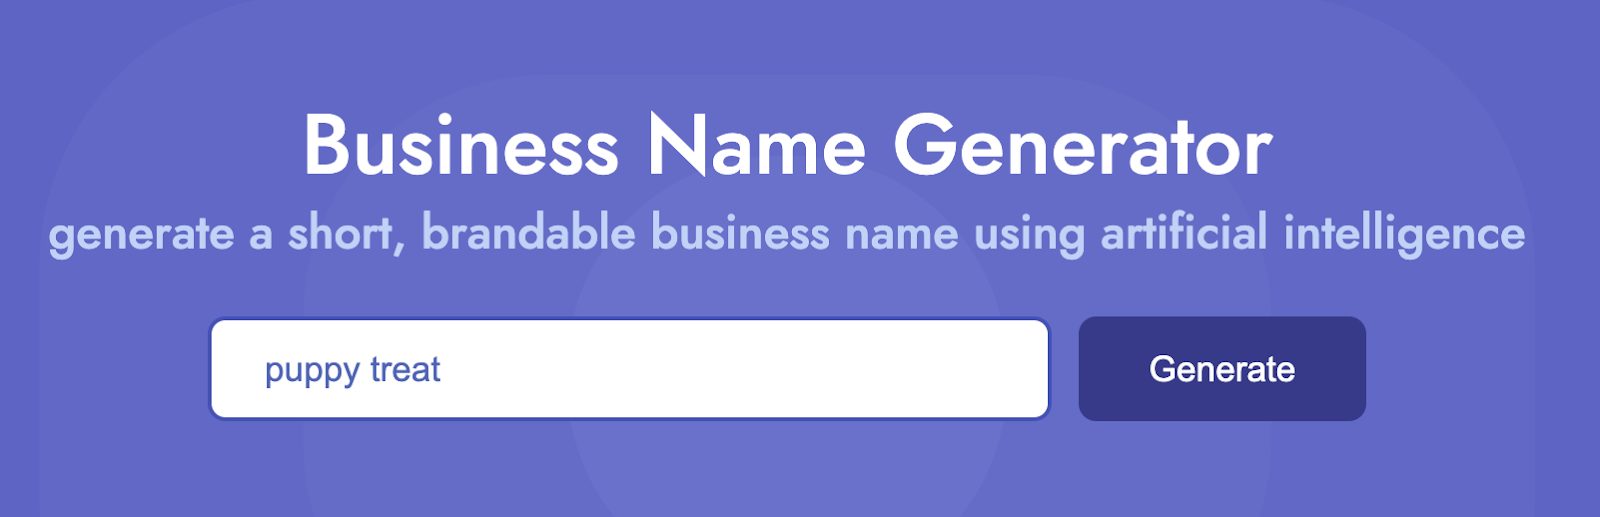 Screenshot of business name generator Namlix showing field to enter words to be used to generate name ideas.